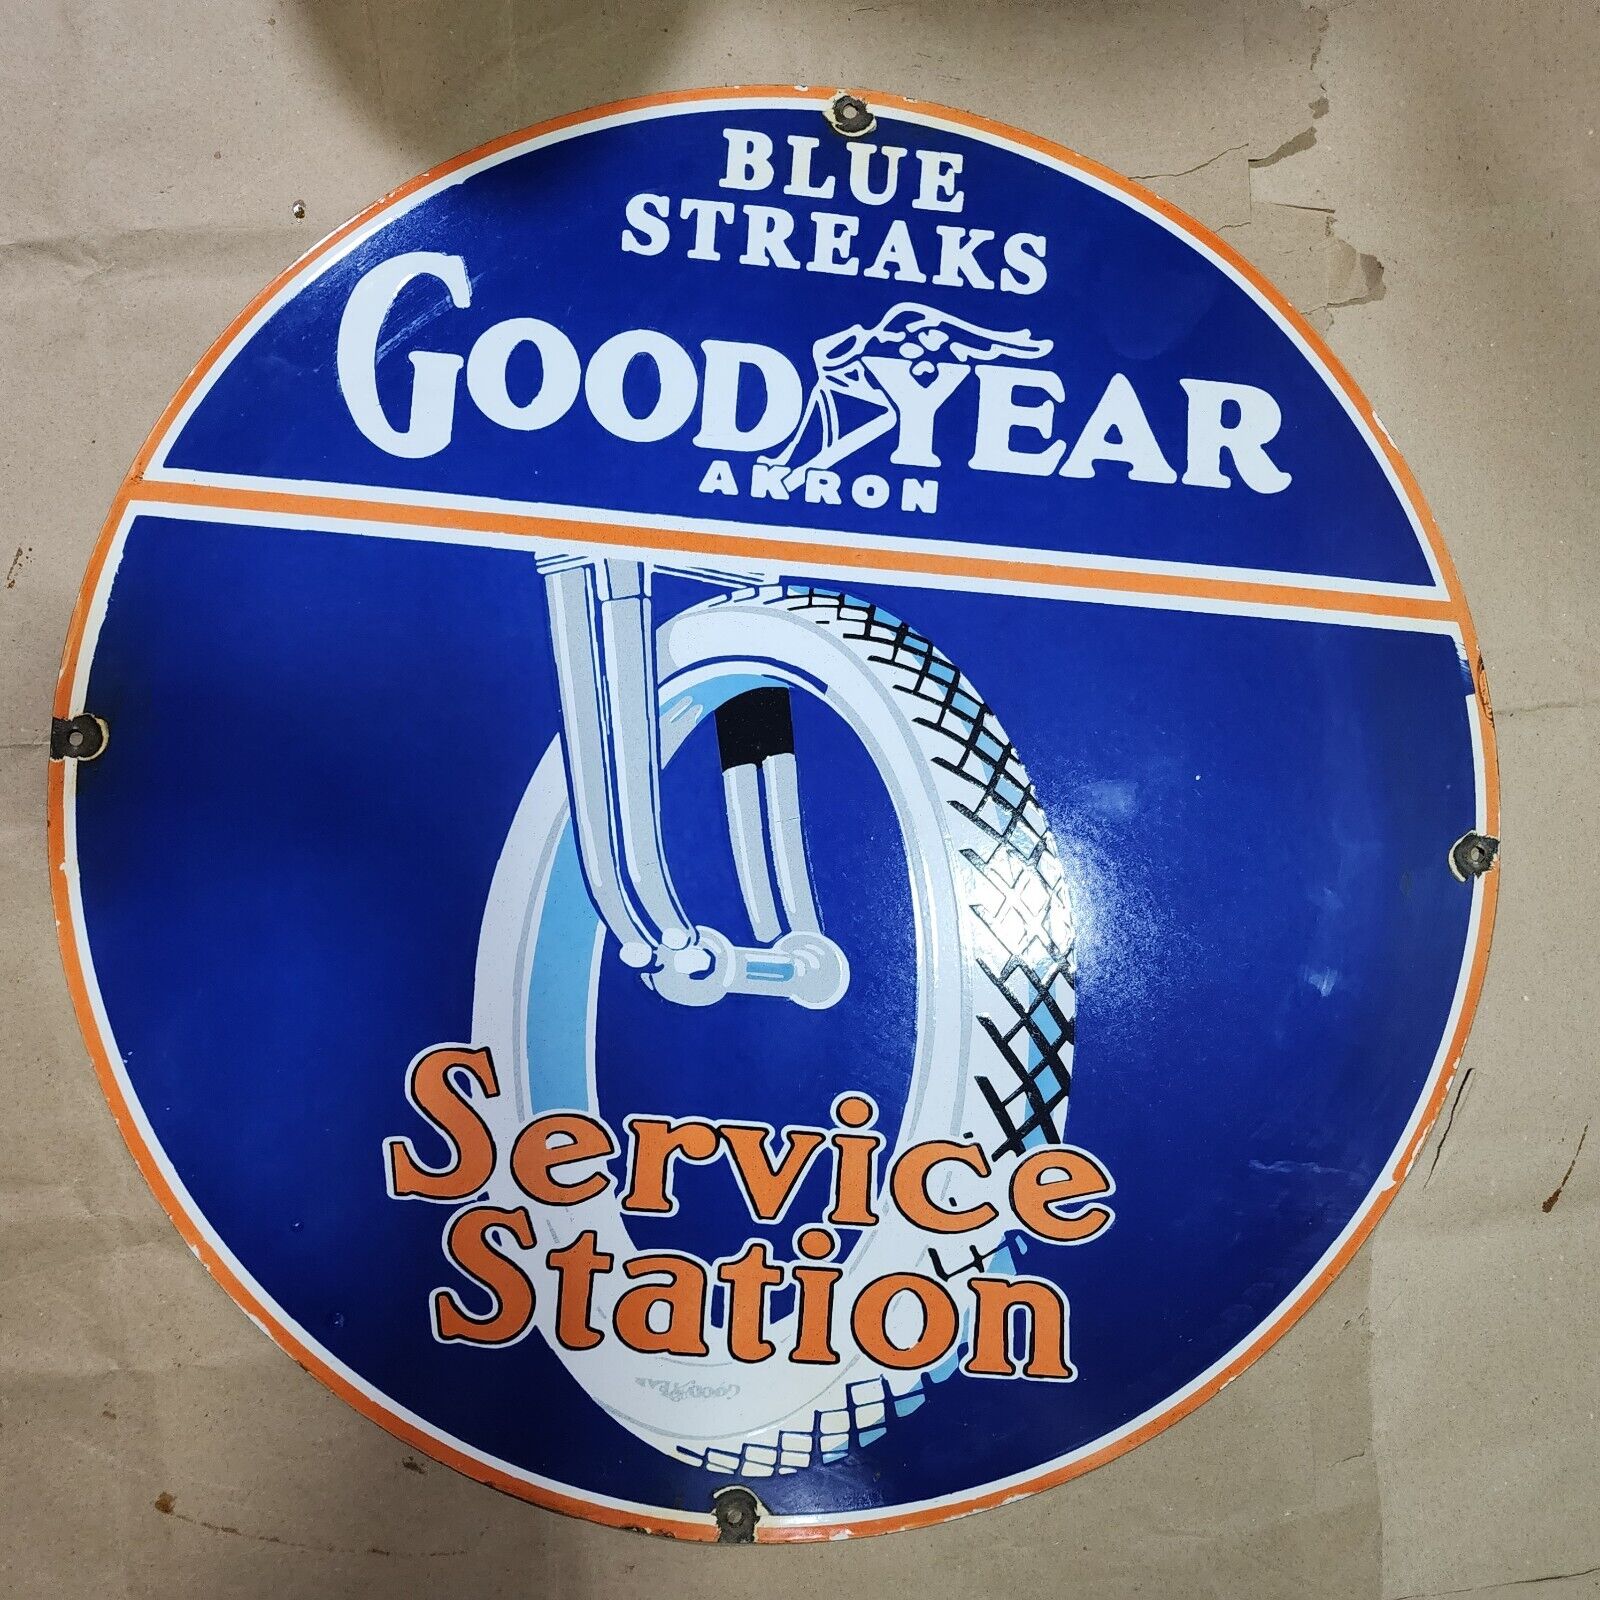 GOODYEAR STATION PORCELAIN ENAMEL SIGN 30 INCHES ROUND